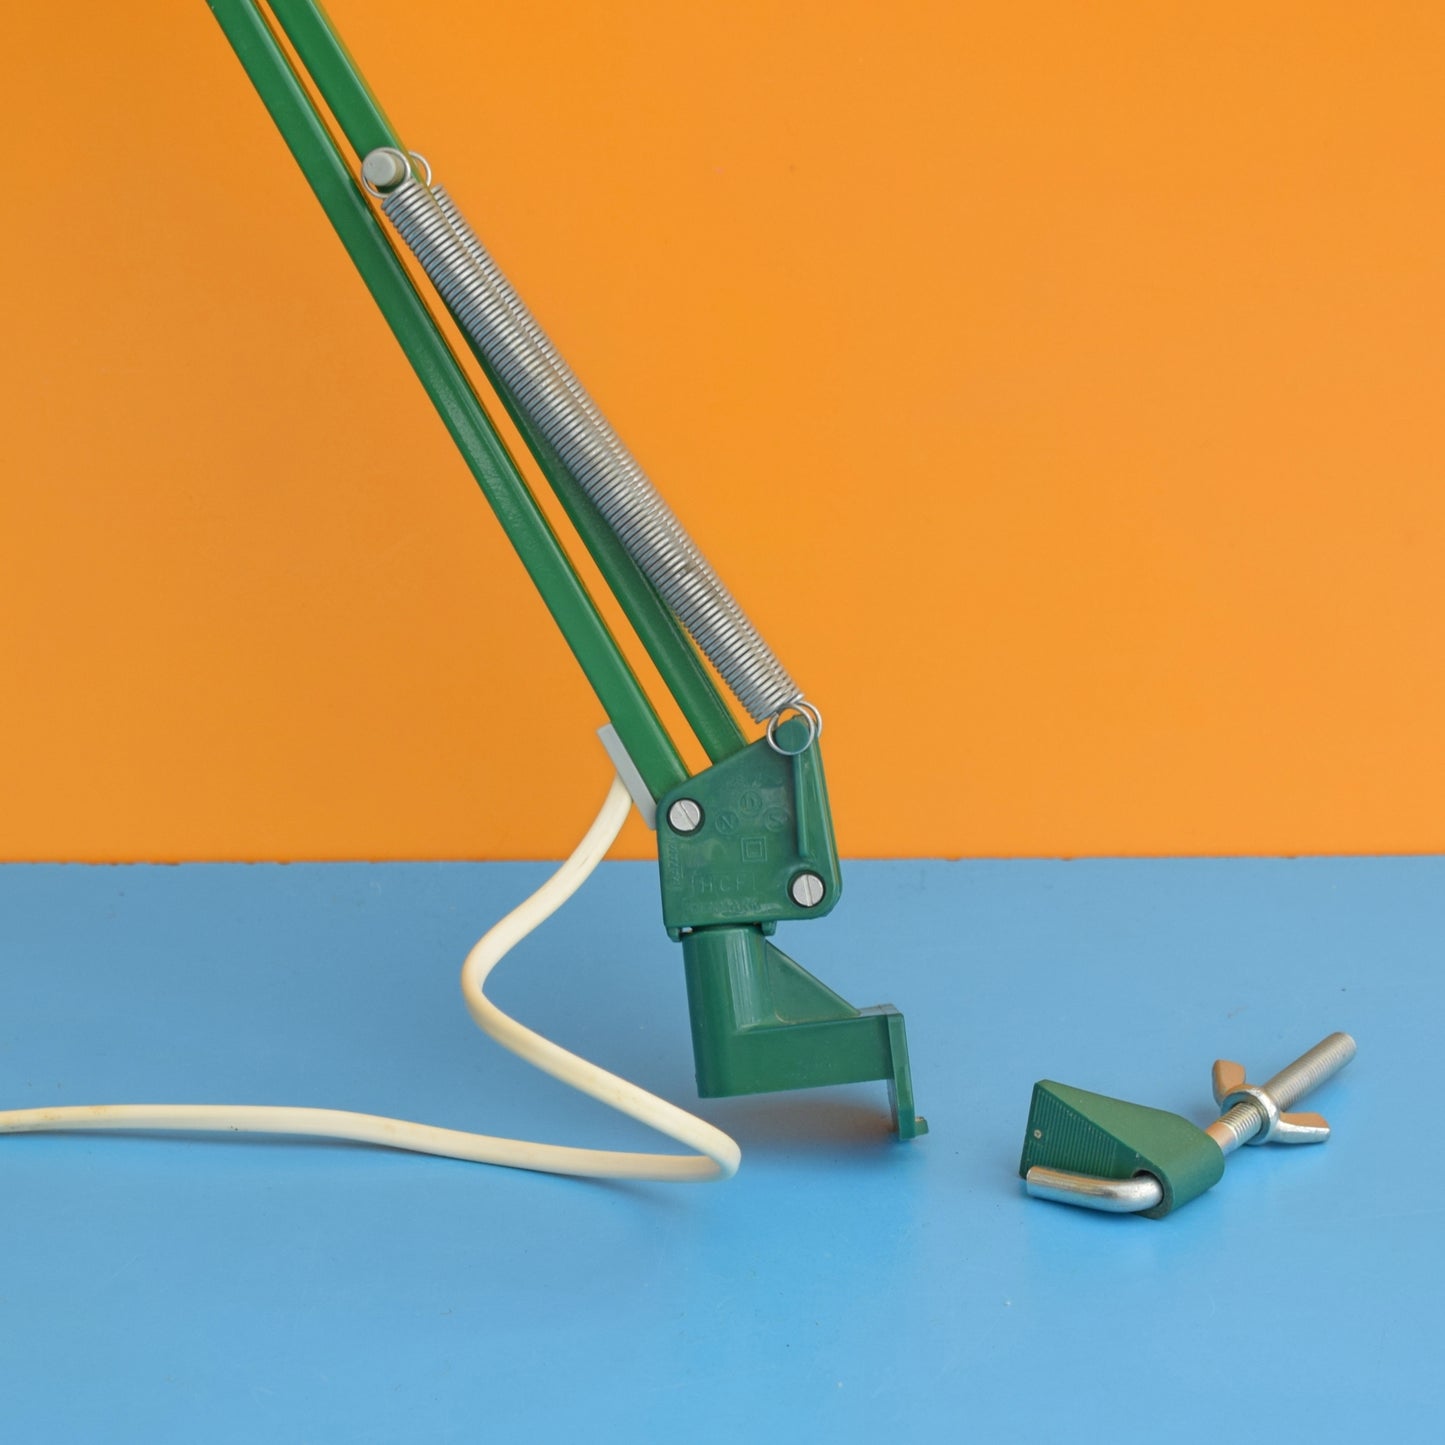 Vintage 1970s Danish Anglepoise Clamp Lamp - Green